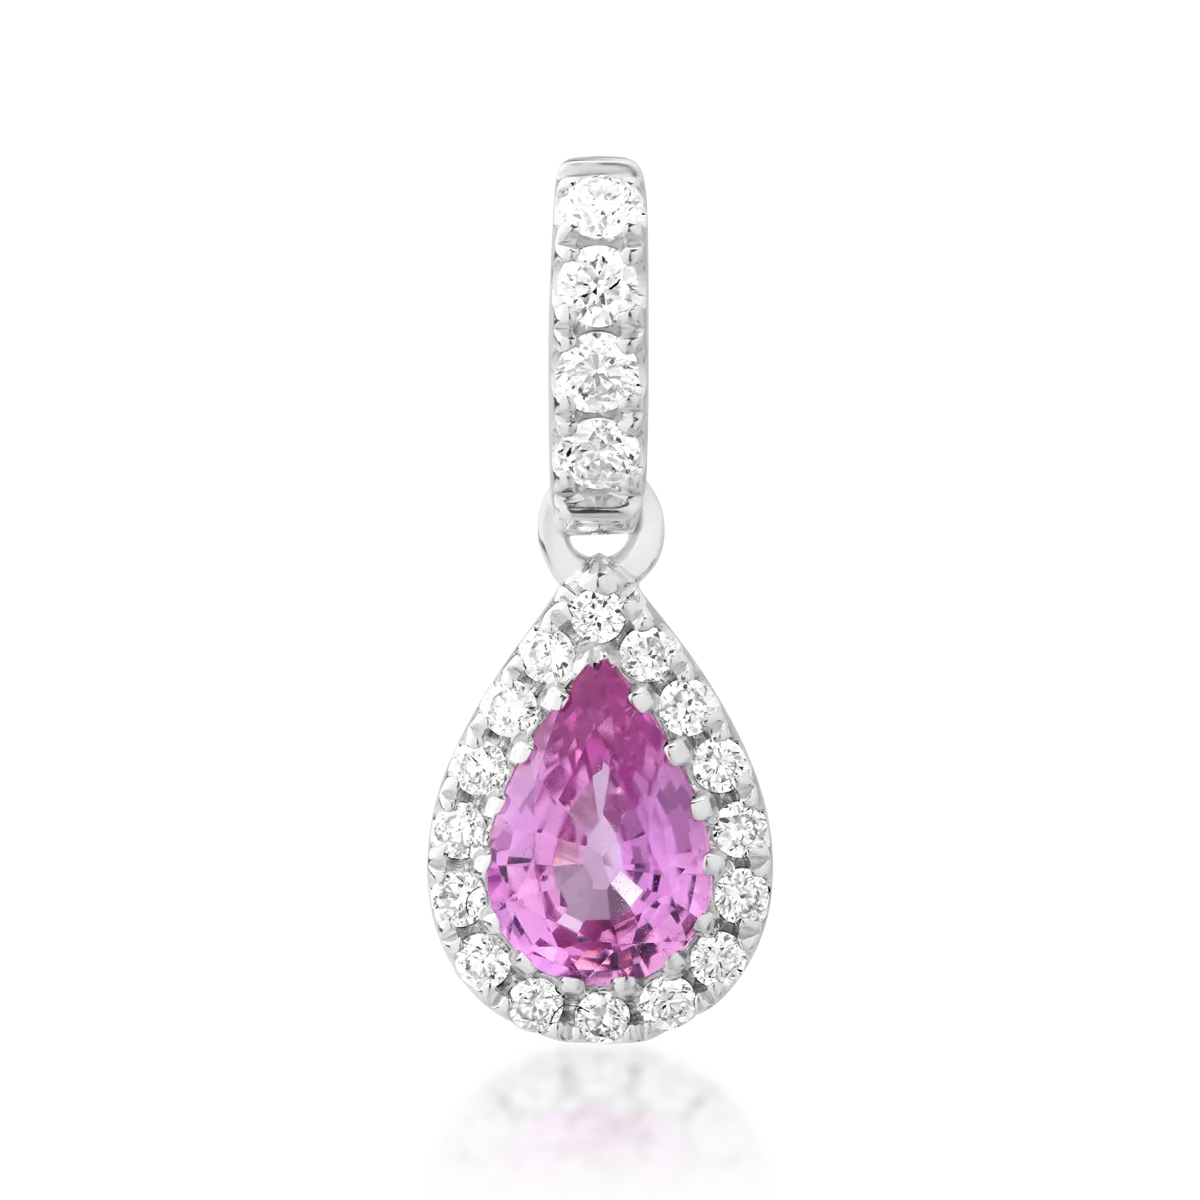 18K white gold pendant with 0.5ct pink sapphire and 0.12ct diamonds